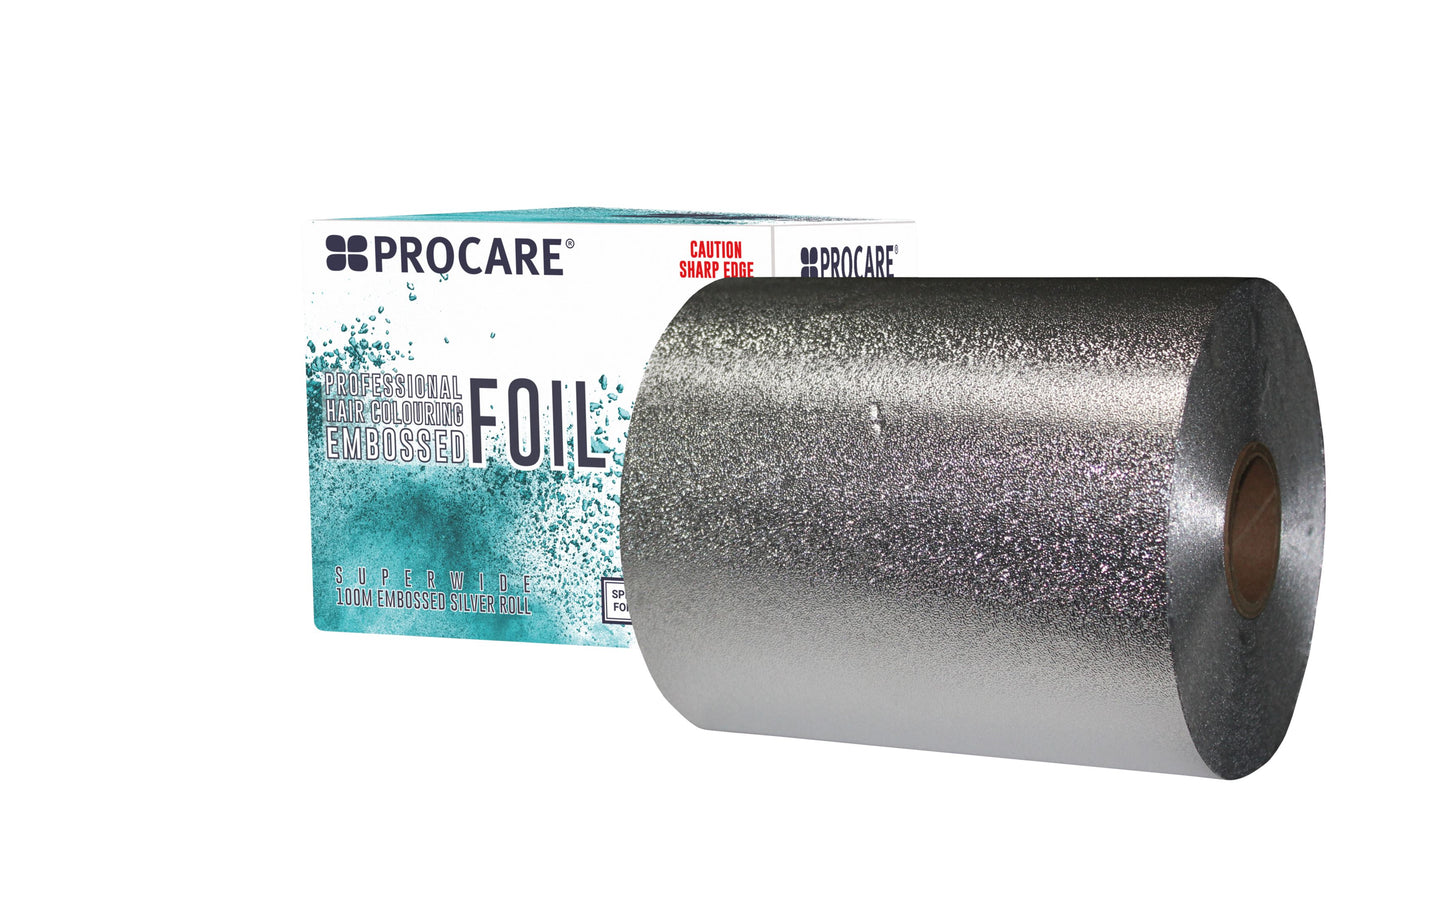 Procare Embossed Foil Roll Superwide 127mm x 100m Hair Colour Pro Care 